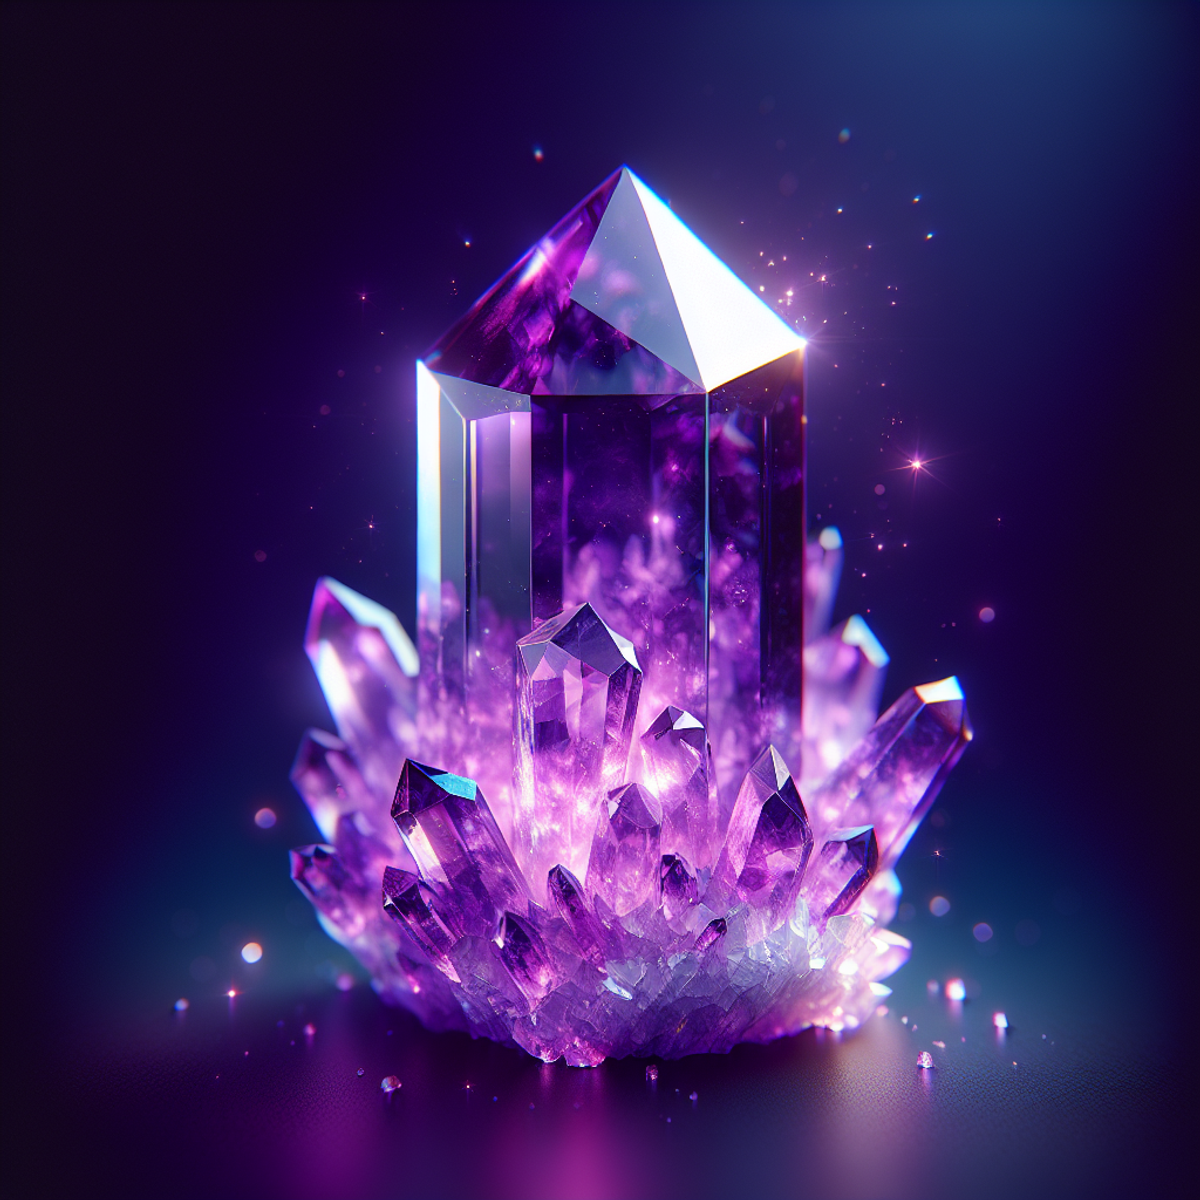 A stunning amethyst crystal glowing with vibrant purple light.